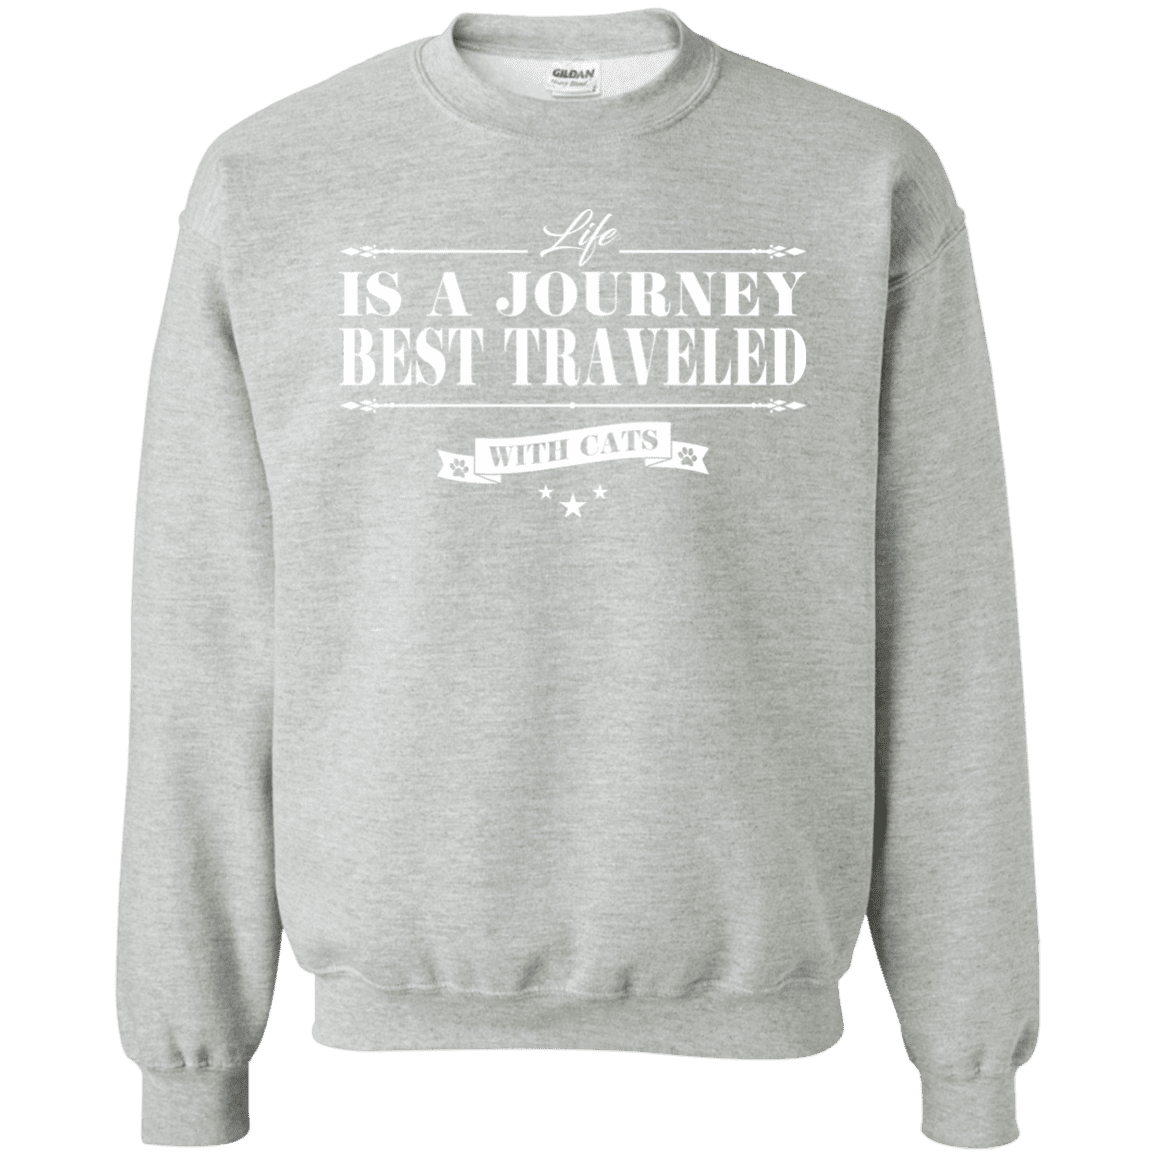 Life Is a Journey Best Travelled With Cats - Sweatshirt.